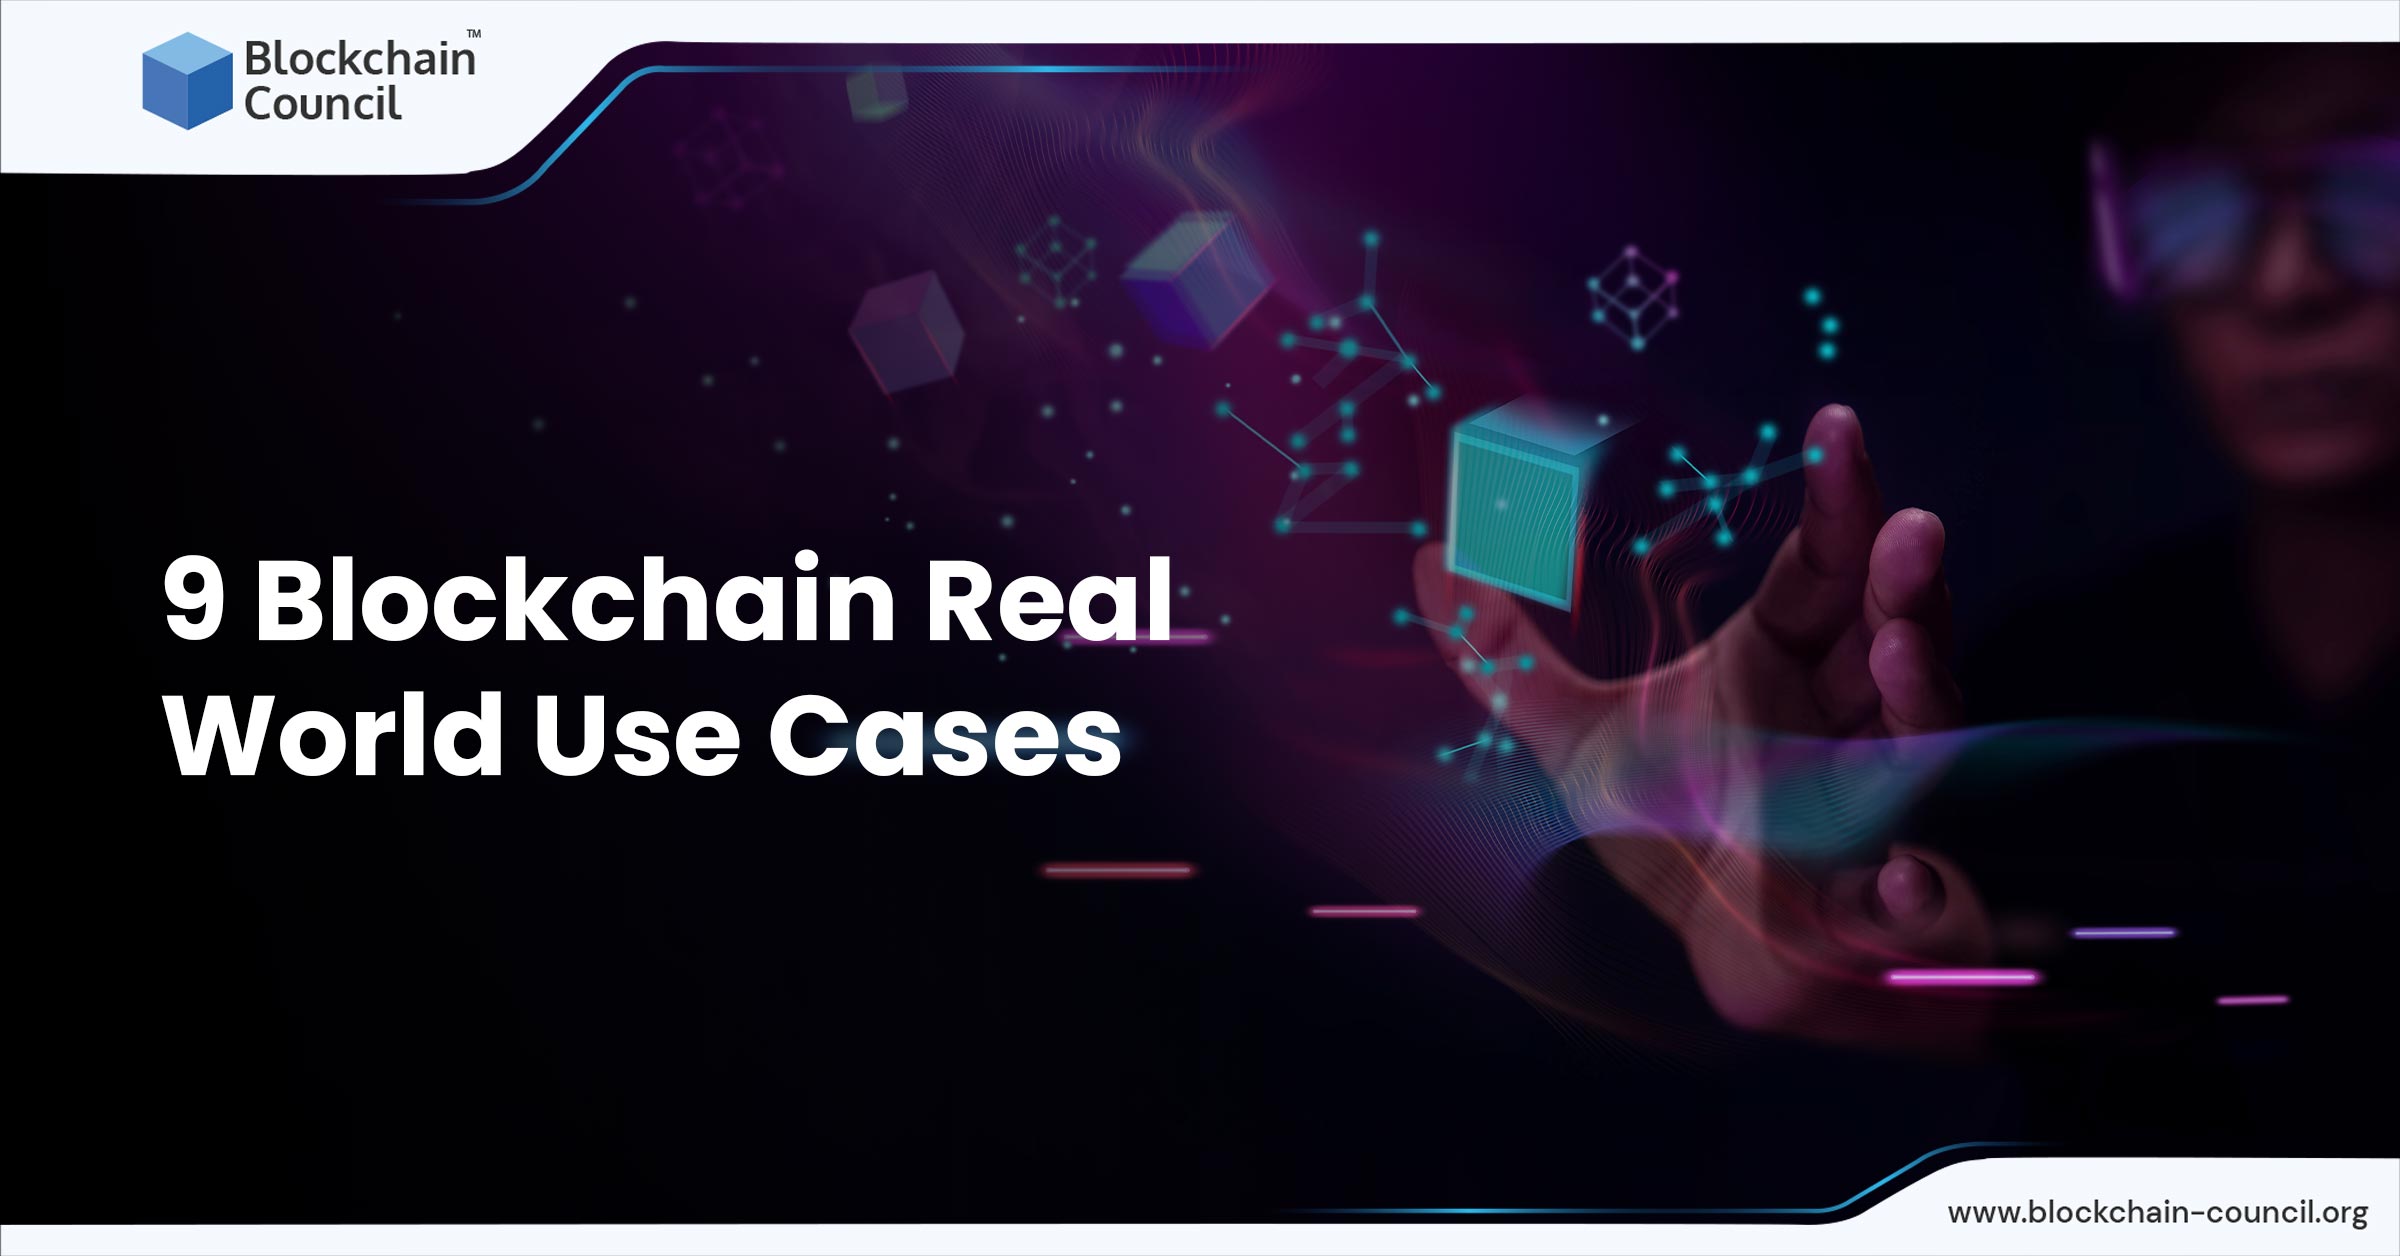 9 Blockchain Real World Use Cases